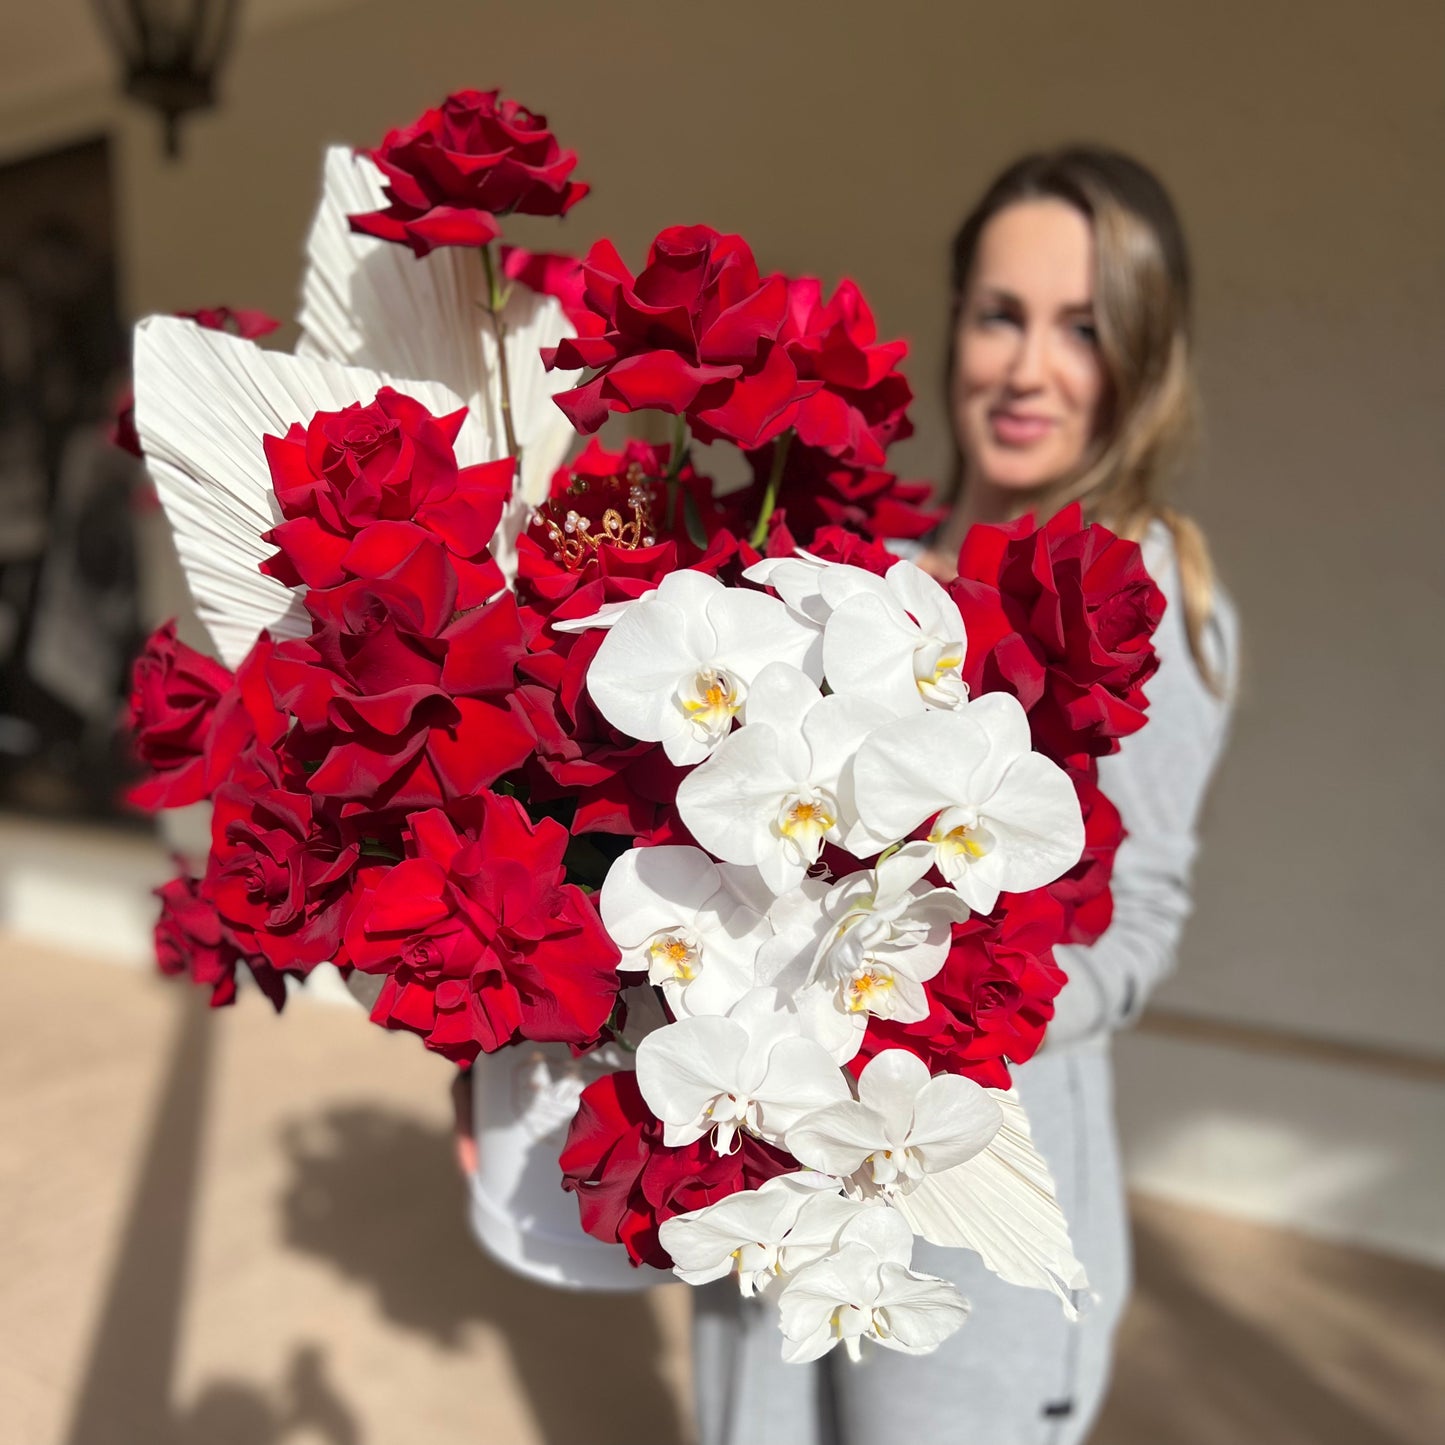 A bouquet of red roses and white orchids